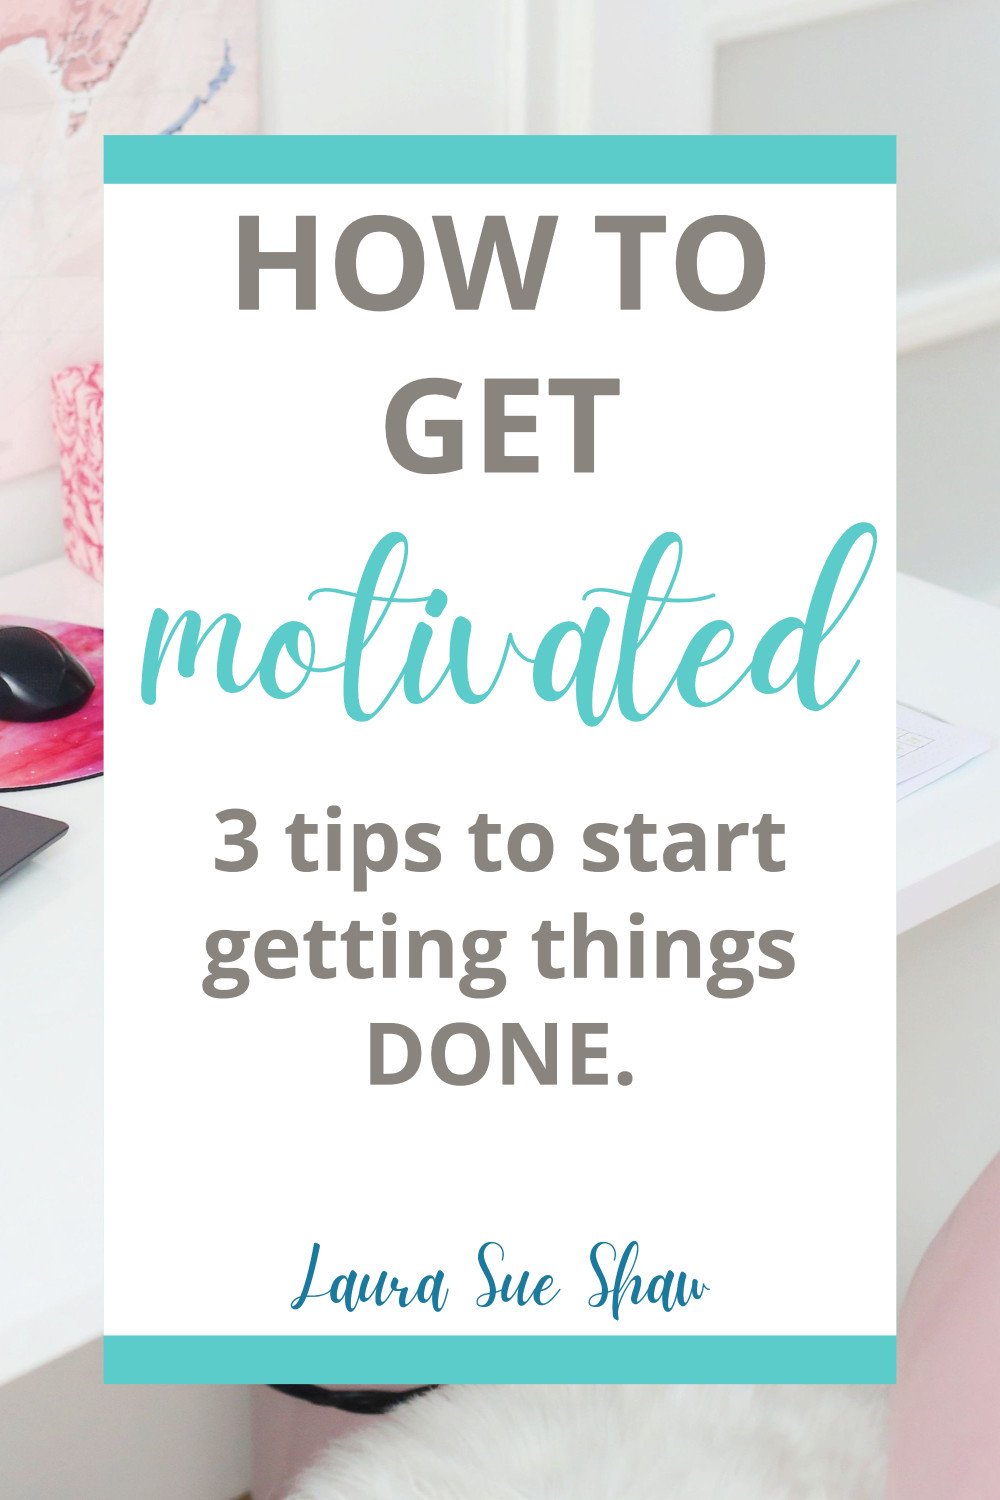 Here are my 3 best tips on how to get motivated. It's a common struggle, but these are what has helped me get things done!